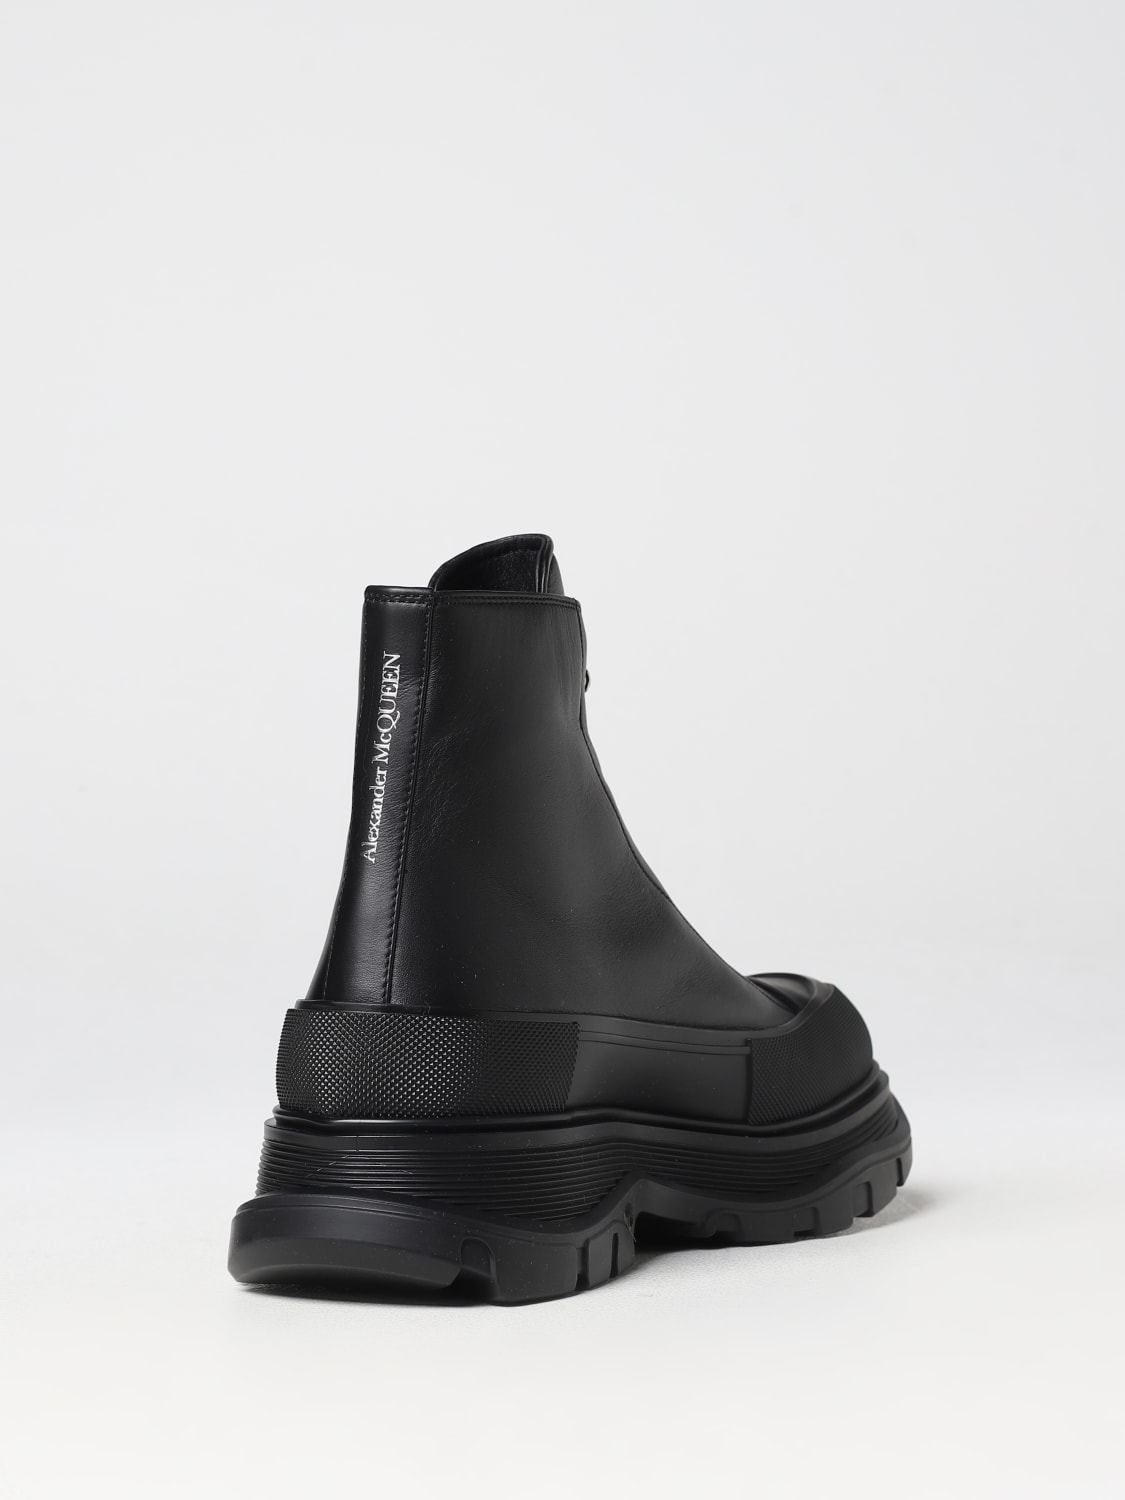 Alexander McQueen Ankle Boots in Nappa with Zip